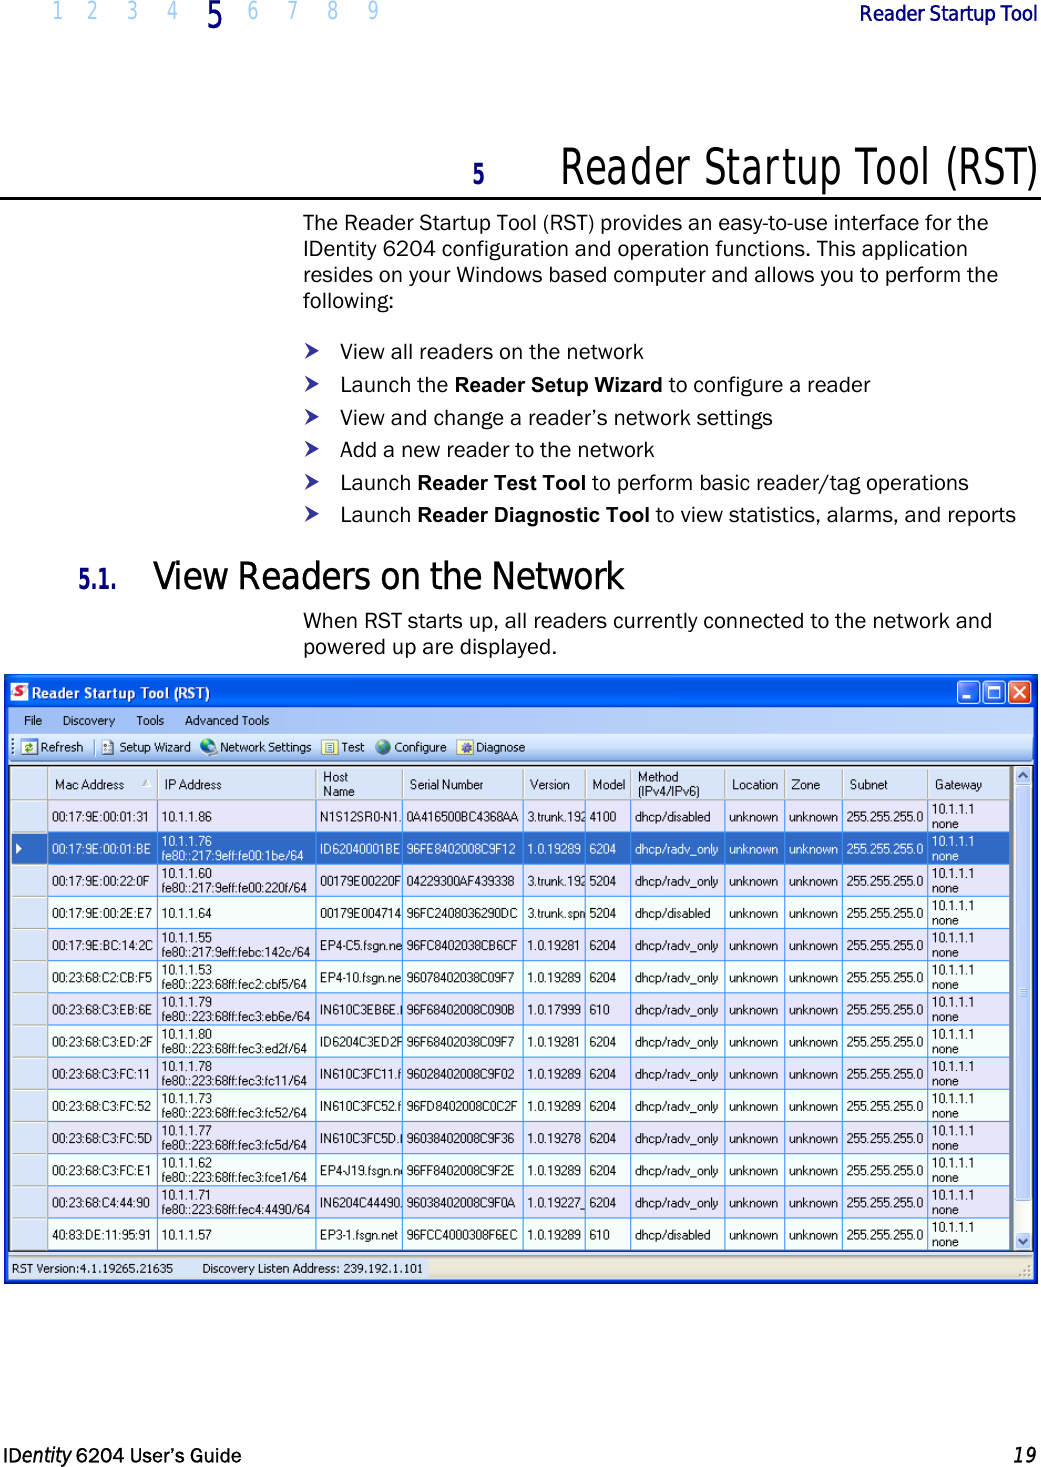  1 2 3 4 5  6 7 8 9        Reader Startup Tool   IDentity 6204 User’s Guide  19  5 Reader Startup Tool (RST) The Reader Startup Tool (RST) provides an easy-to-use interface for the IDentity 6204 configuration and operation functions. This application resides on your Windows based computer and allows you to perform the following: h View all readers on the network h Launch the Reader Setup Wizard to configure a reader h View and change a reader’s network settings h Add a new reader to the network h Launch Reader Test Tool to perform basic reader/tag operations h Launch Reader Diagnostic Tool to view statistics, alarms, and reports 5.1. View Readers on the Network When RST starts up, all readers currently connected to the network and powered up are displayed.  